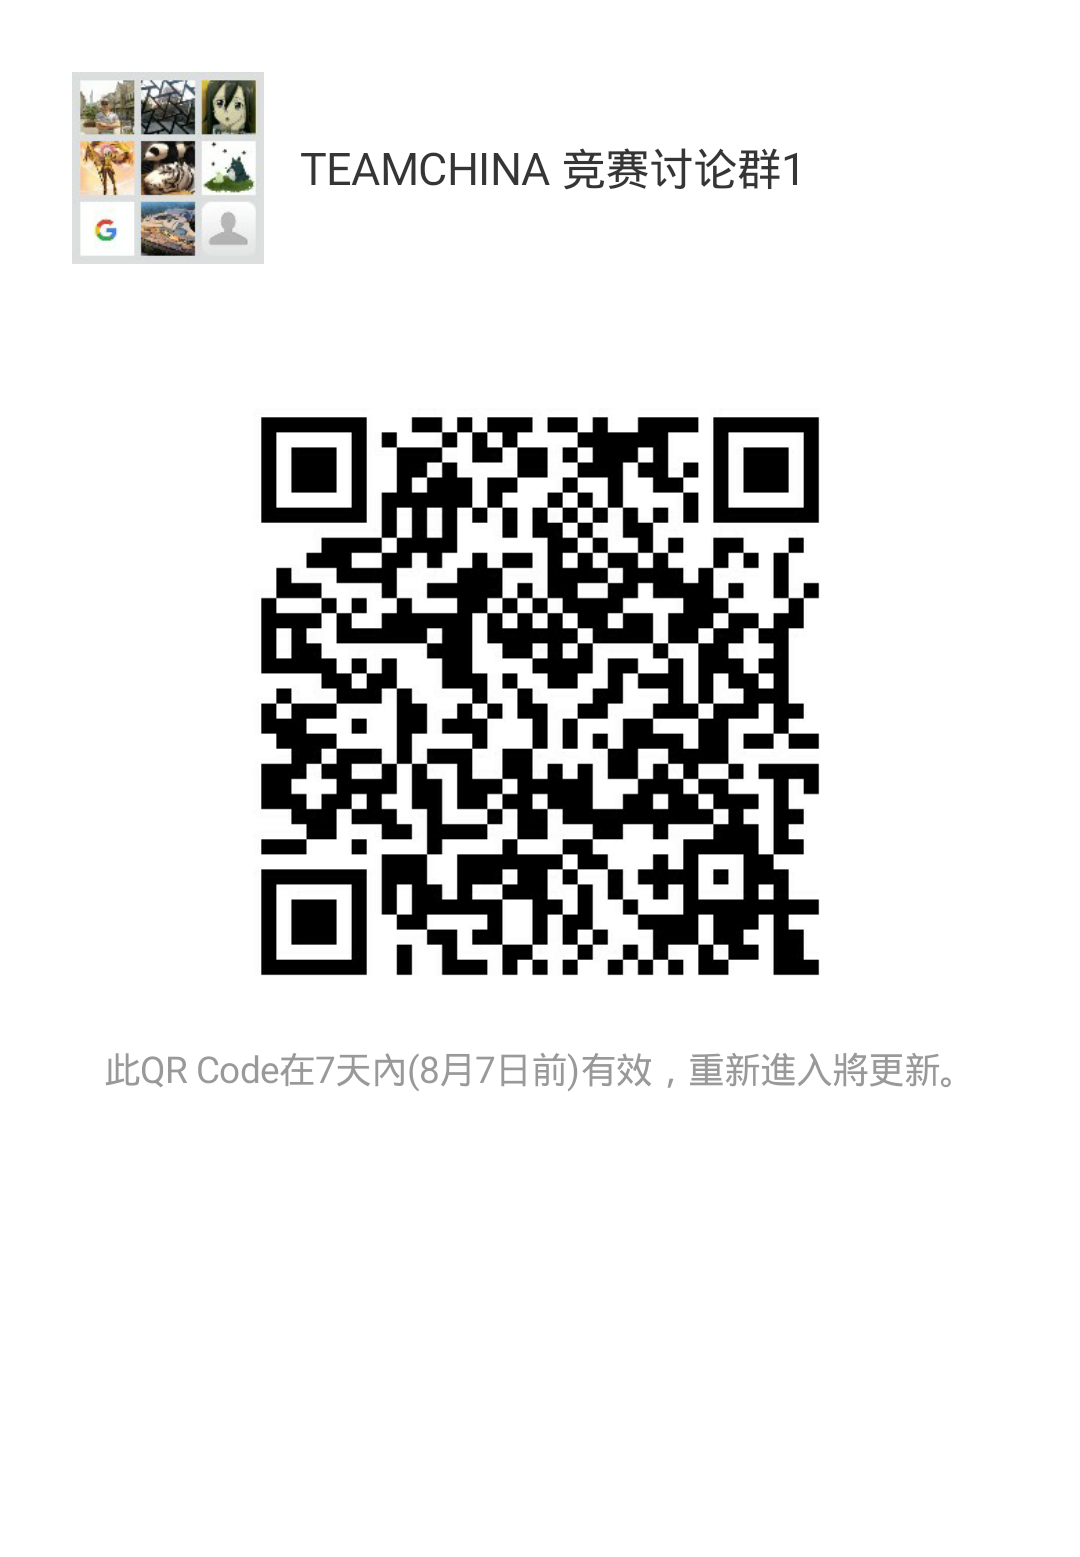 mmqrcode1501506120132.png